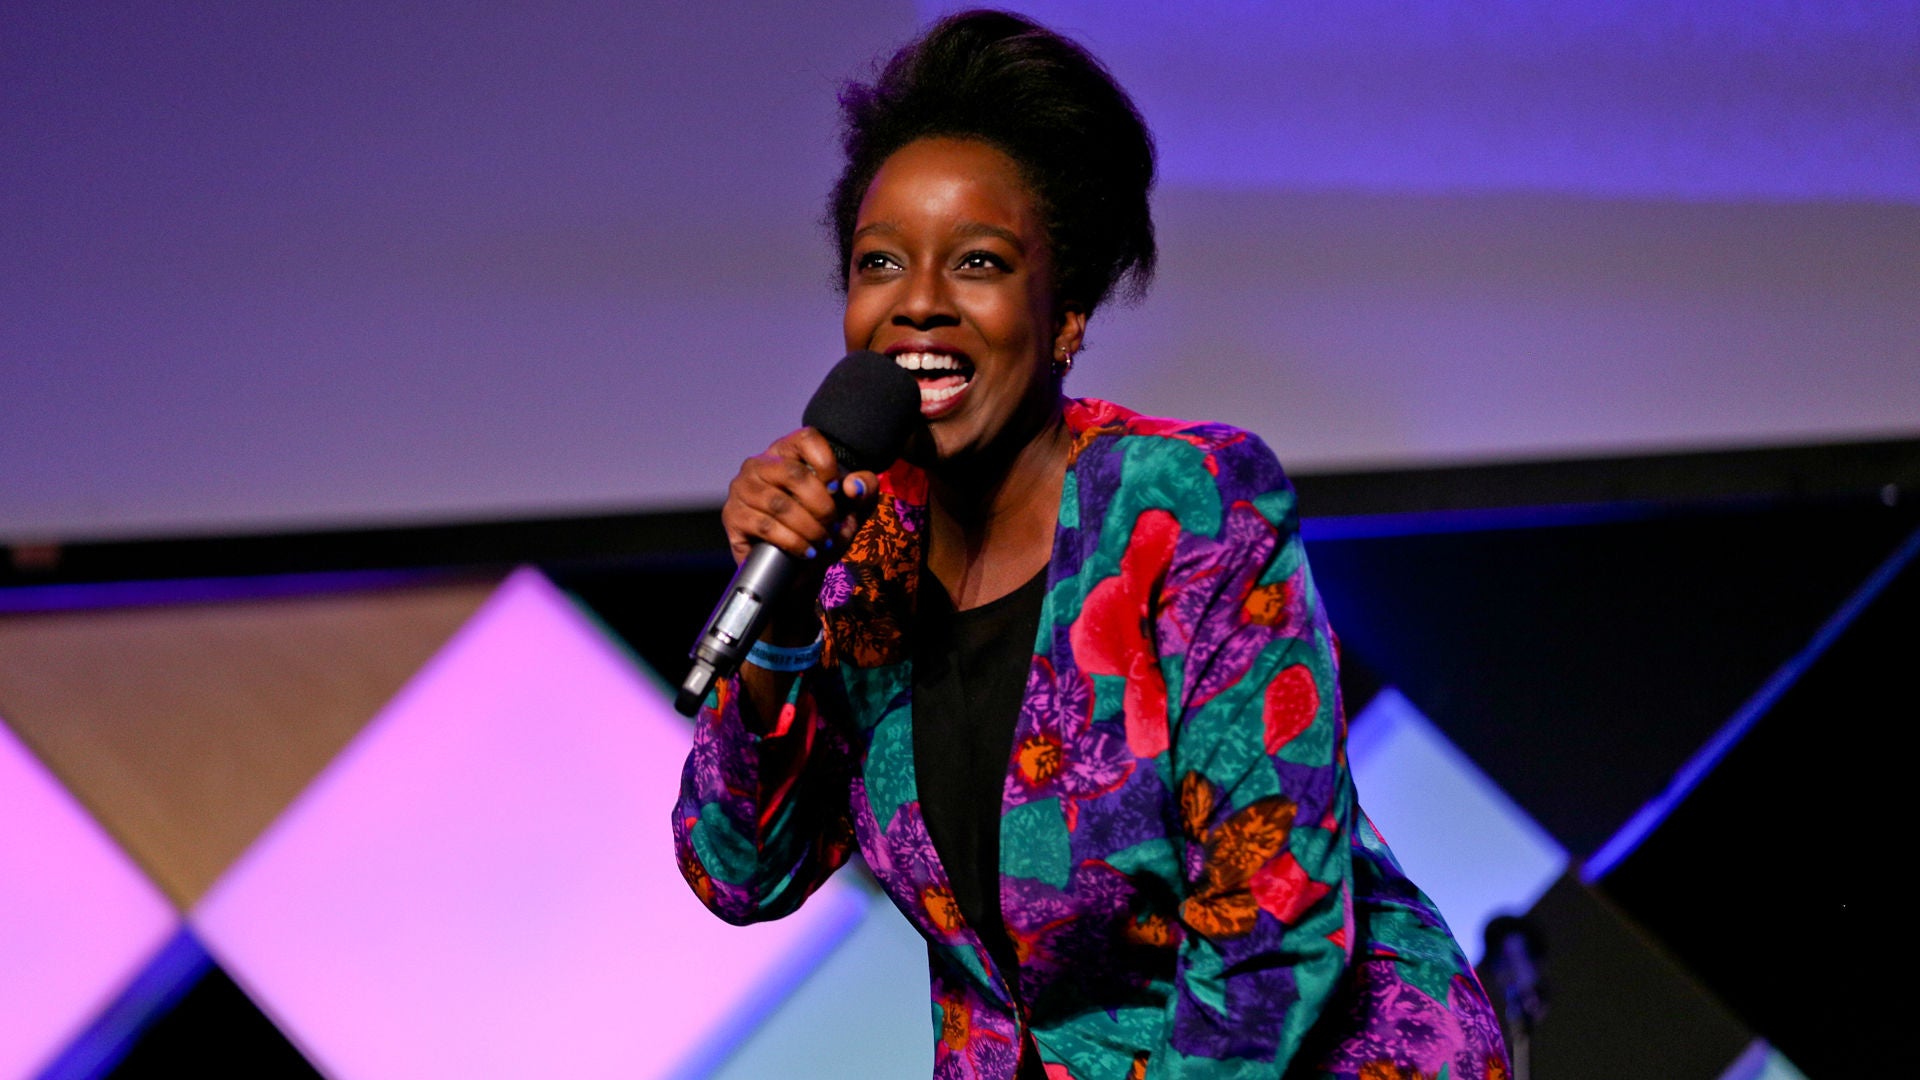 Lolly Adefope is a talented new character comedian